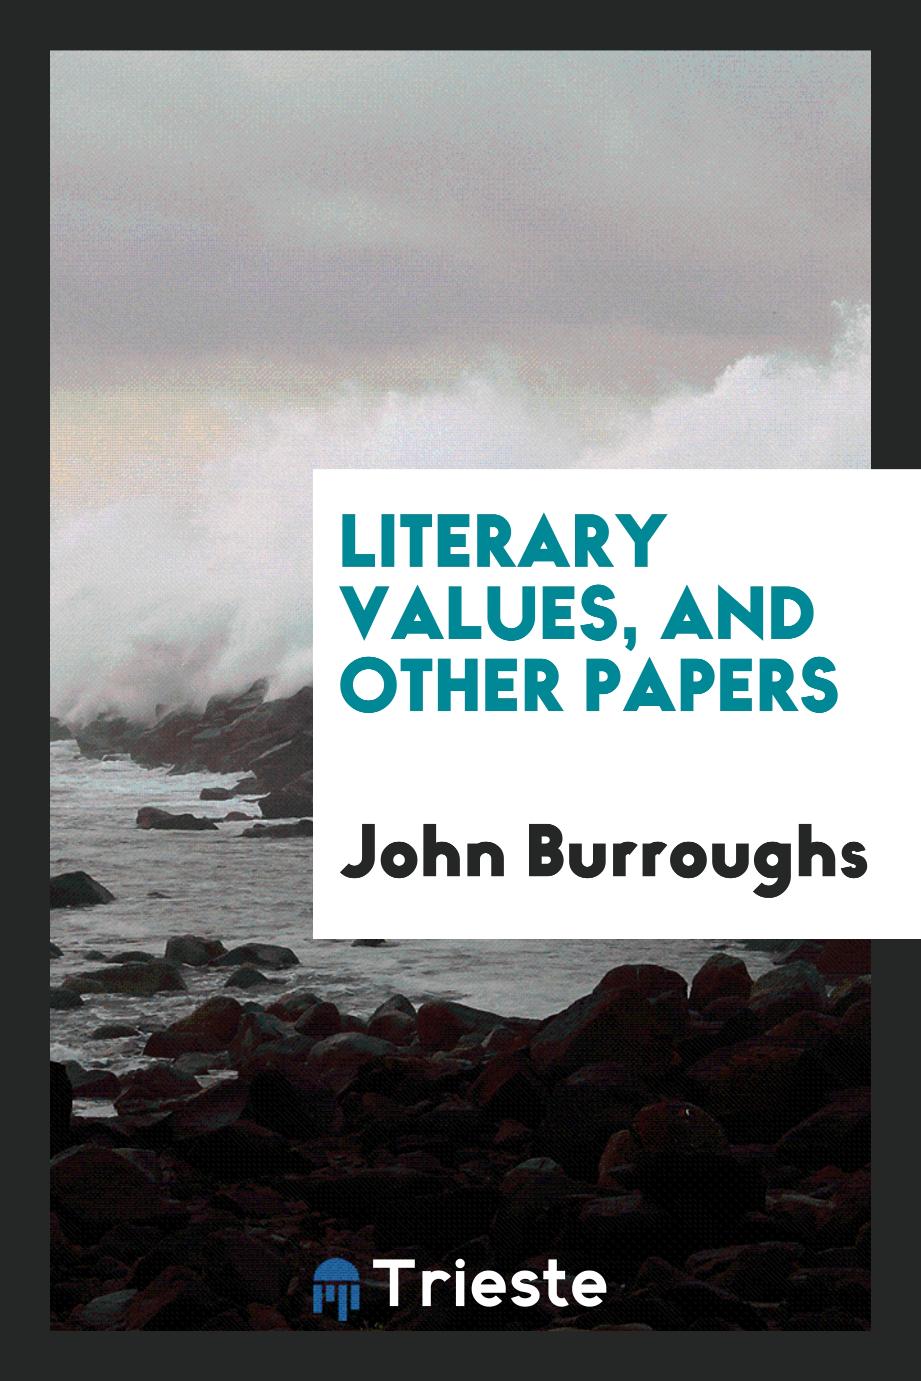 Literary values, and other papers